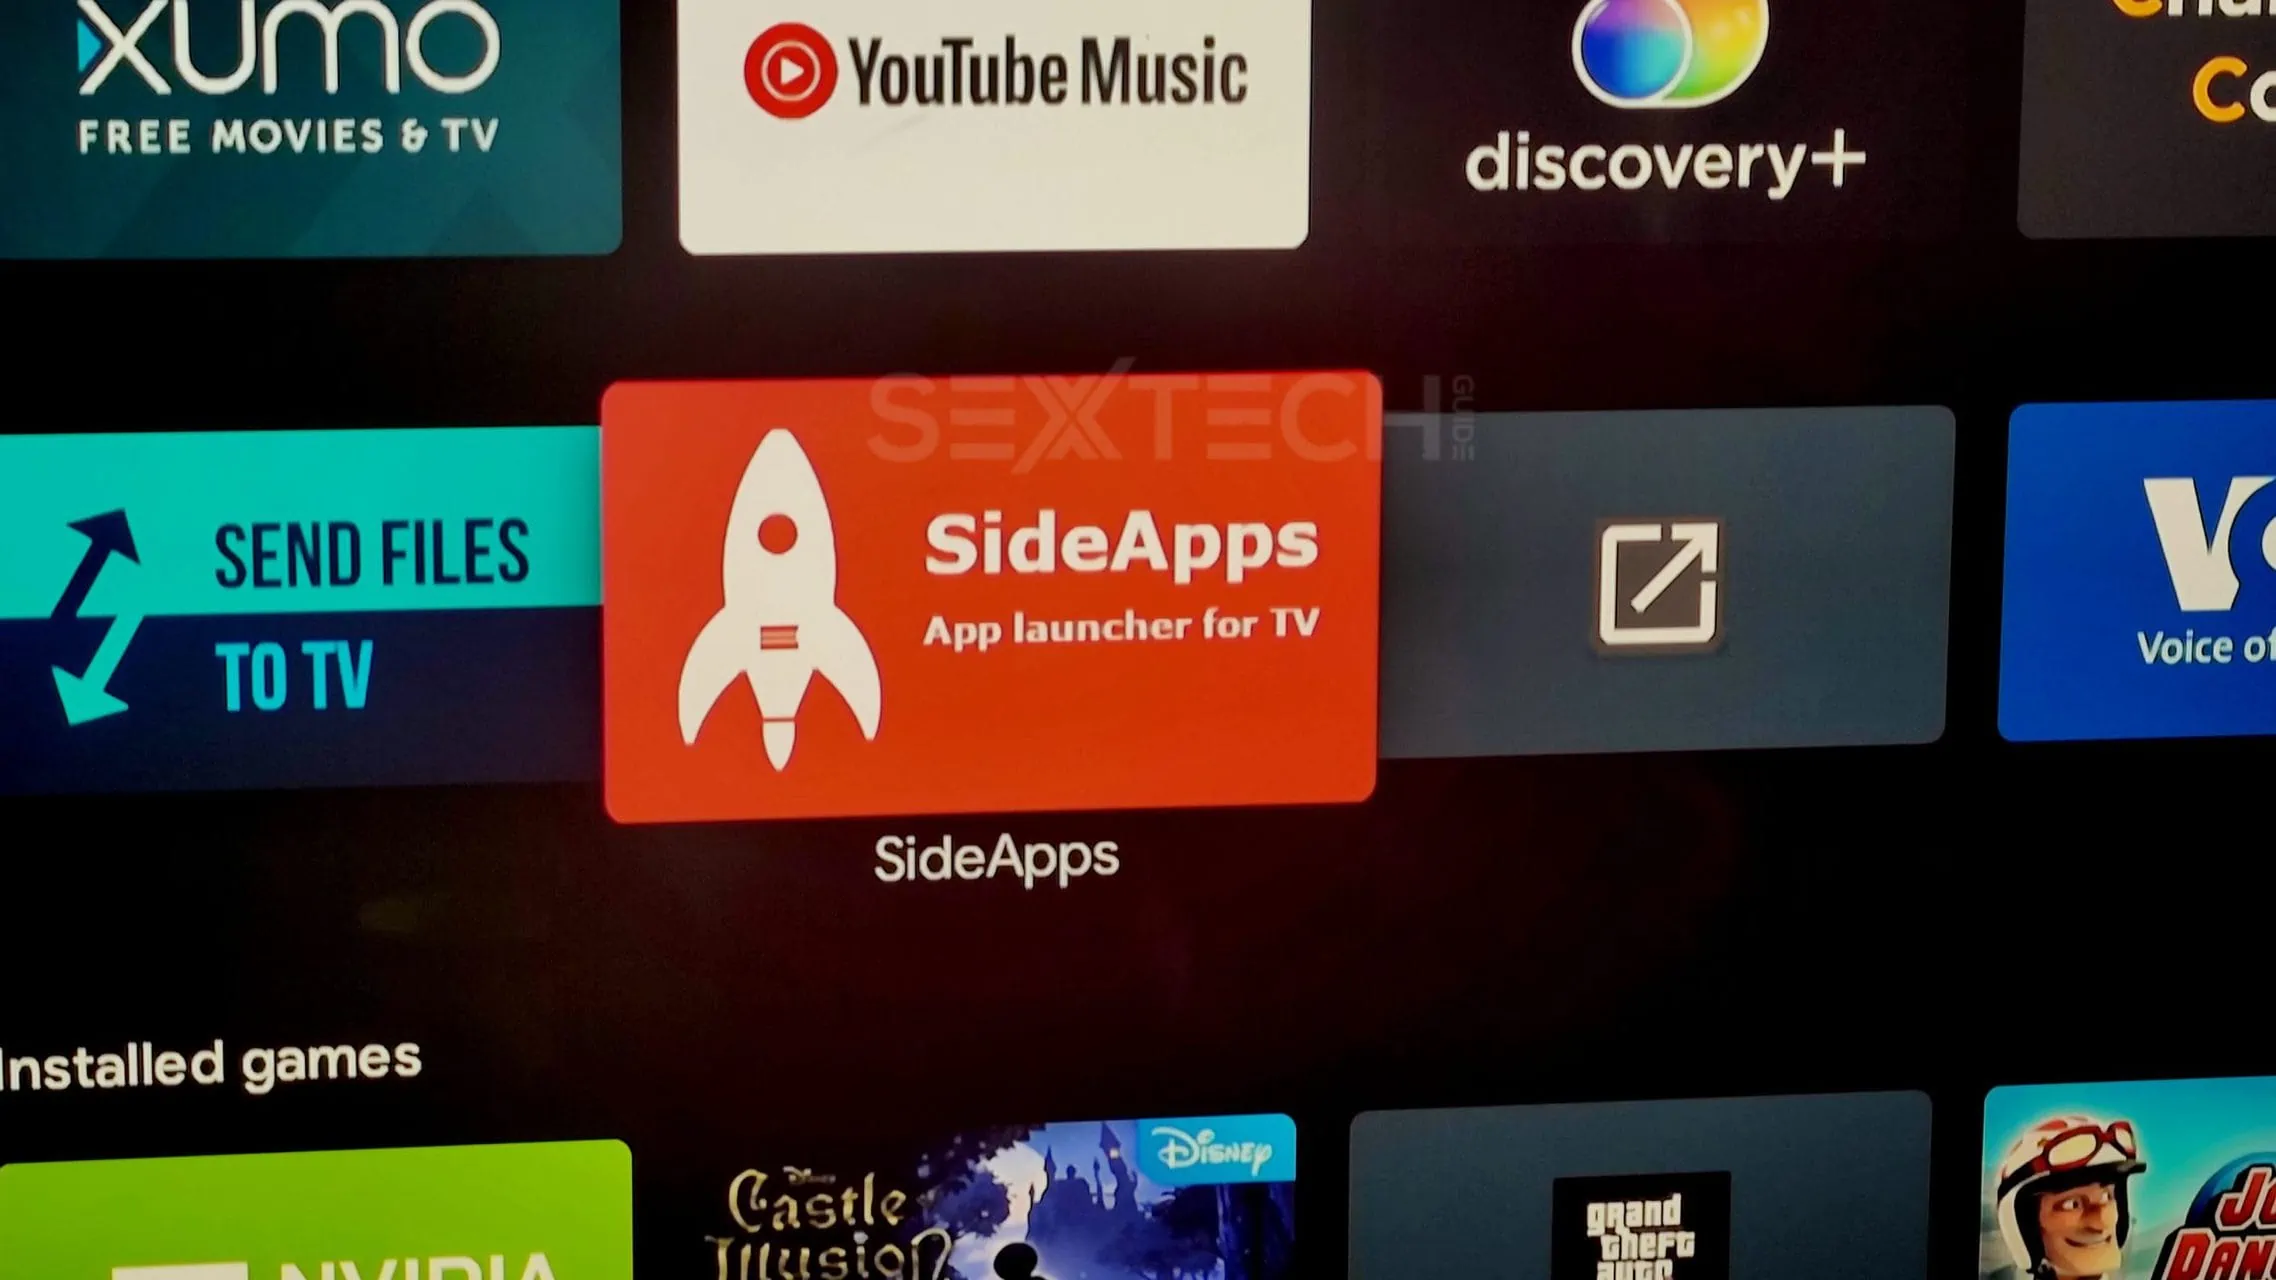 sideapps launcher app for Android TV/Google TV